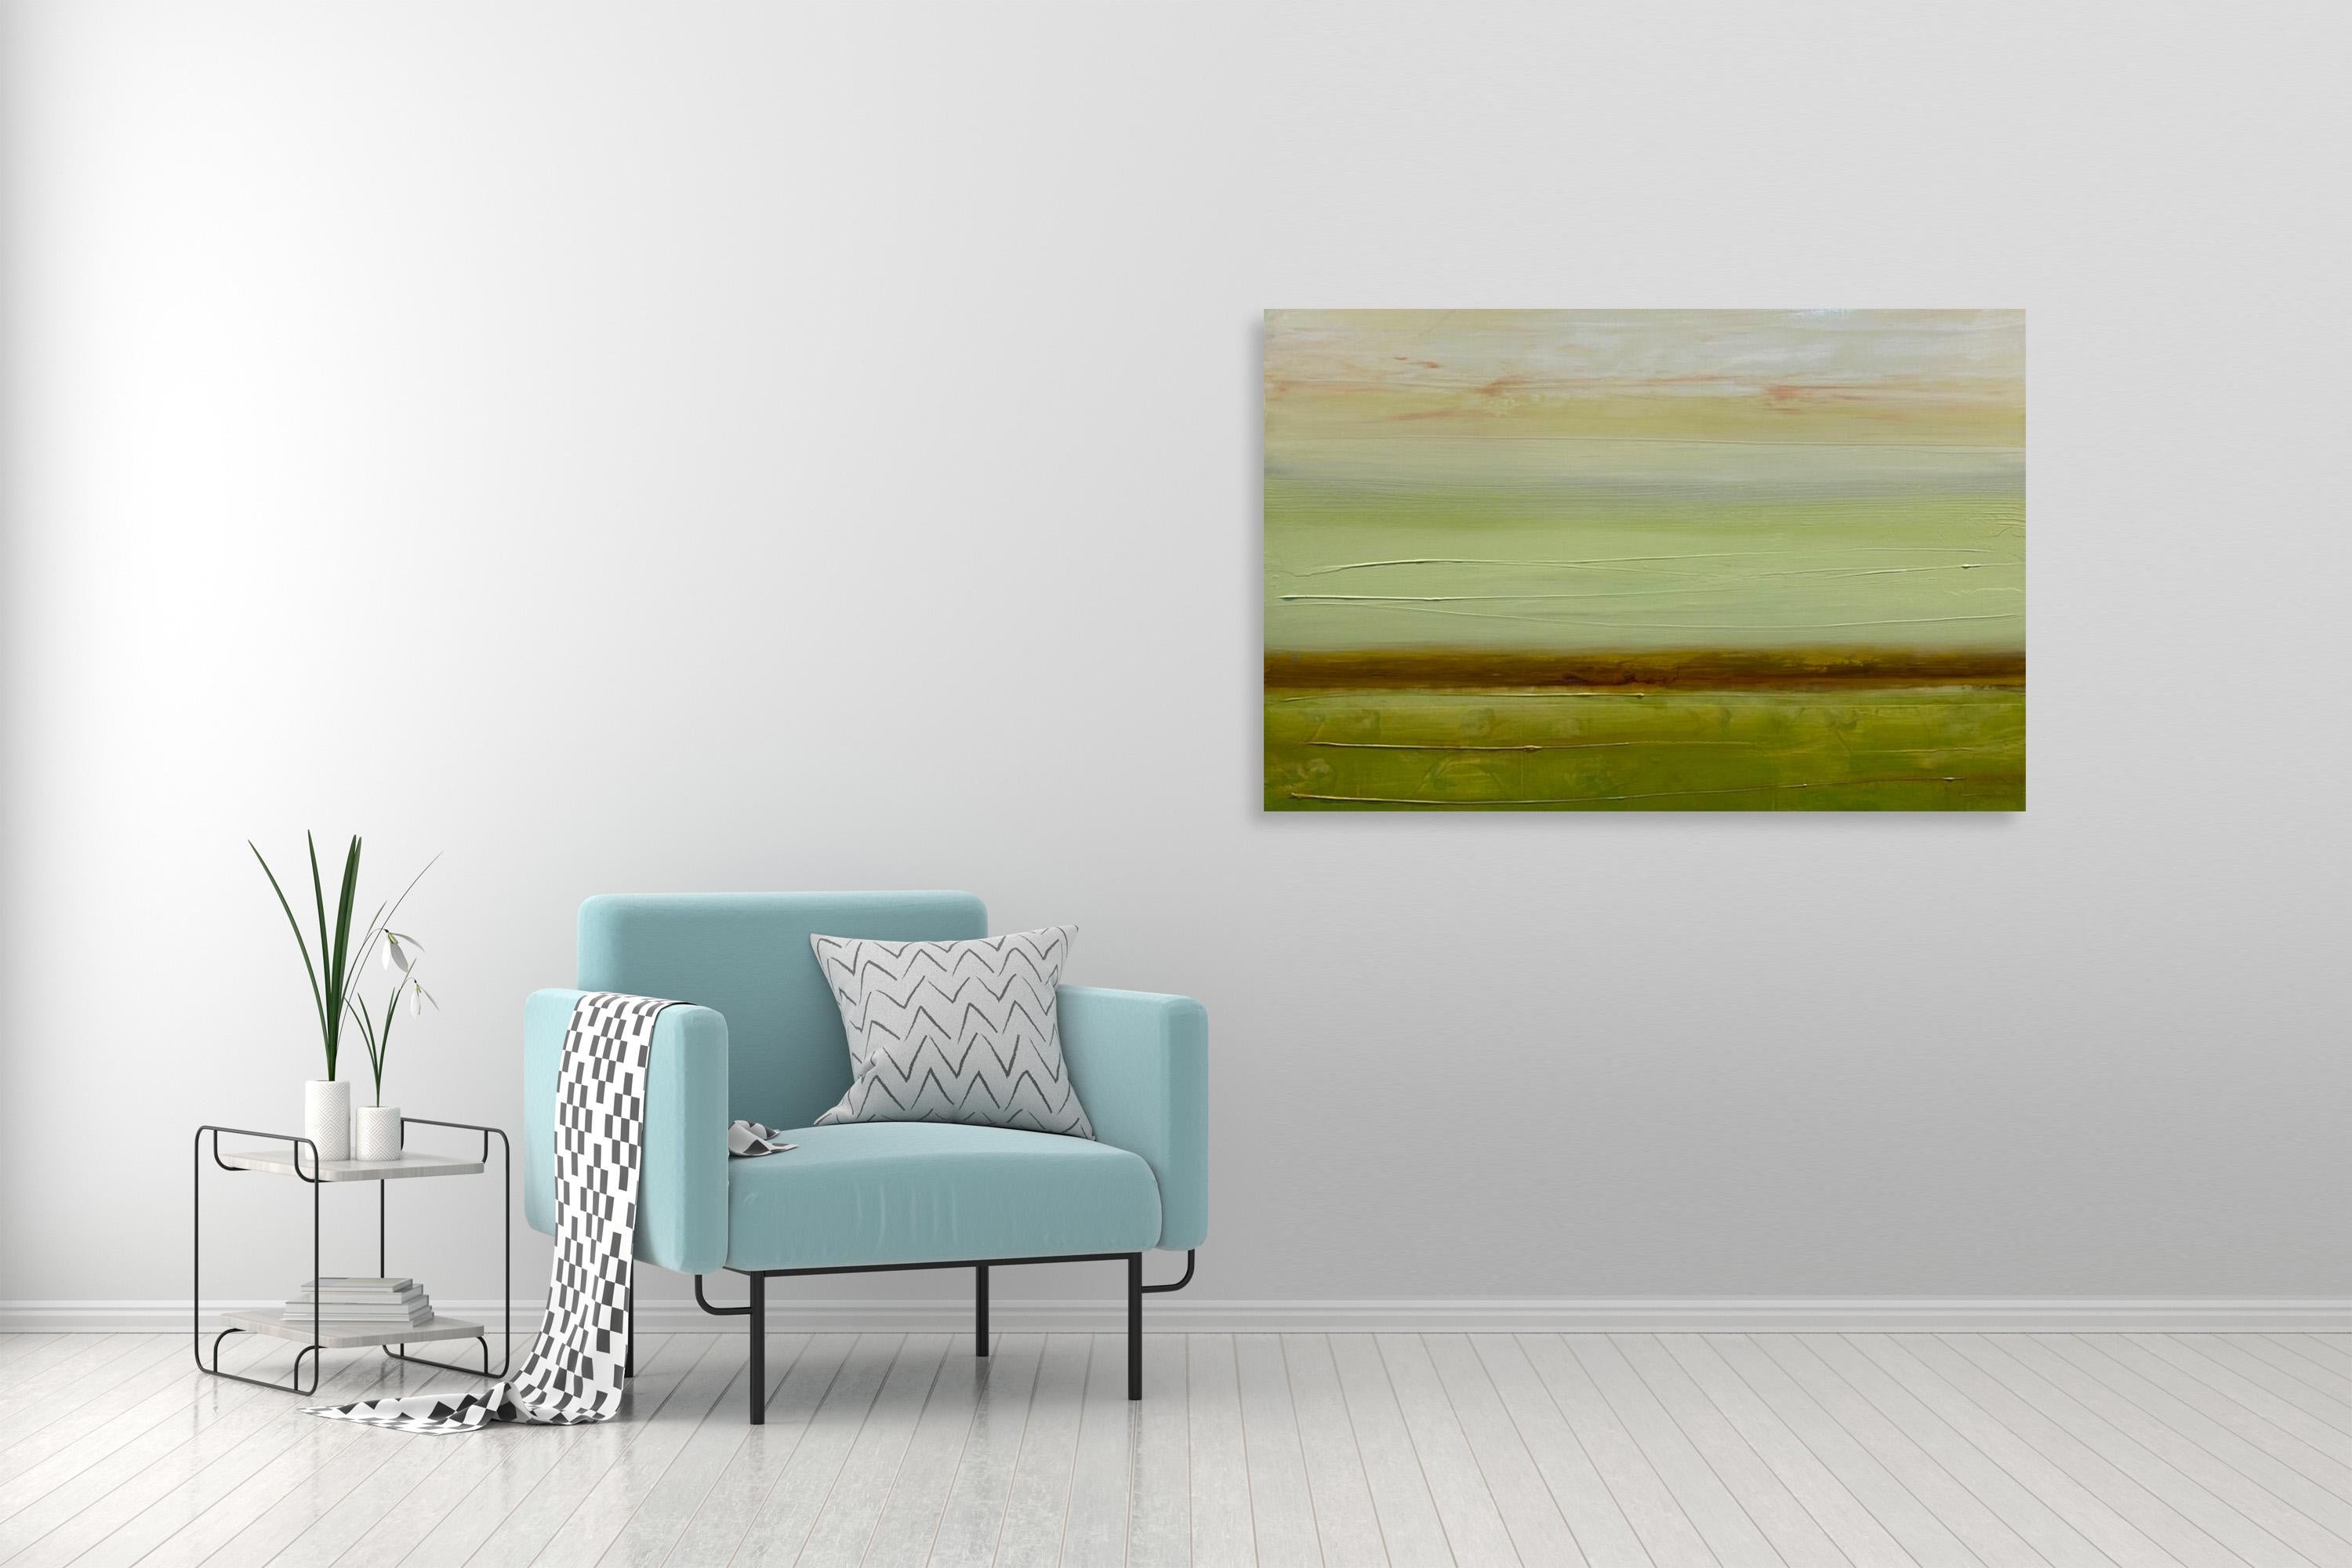  Abstract Large  Contemporary Landscape Mixed Media Painting By Katheryn  - Brown Landscape Painting by Katheryn Holt